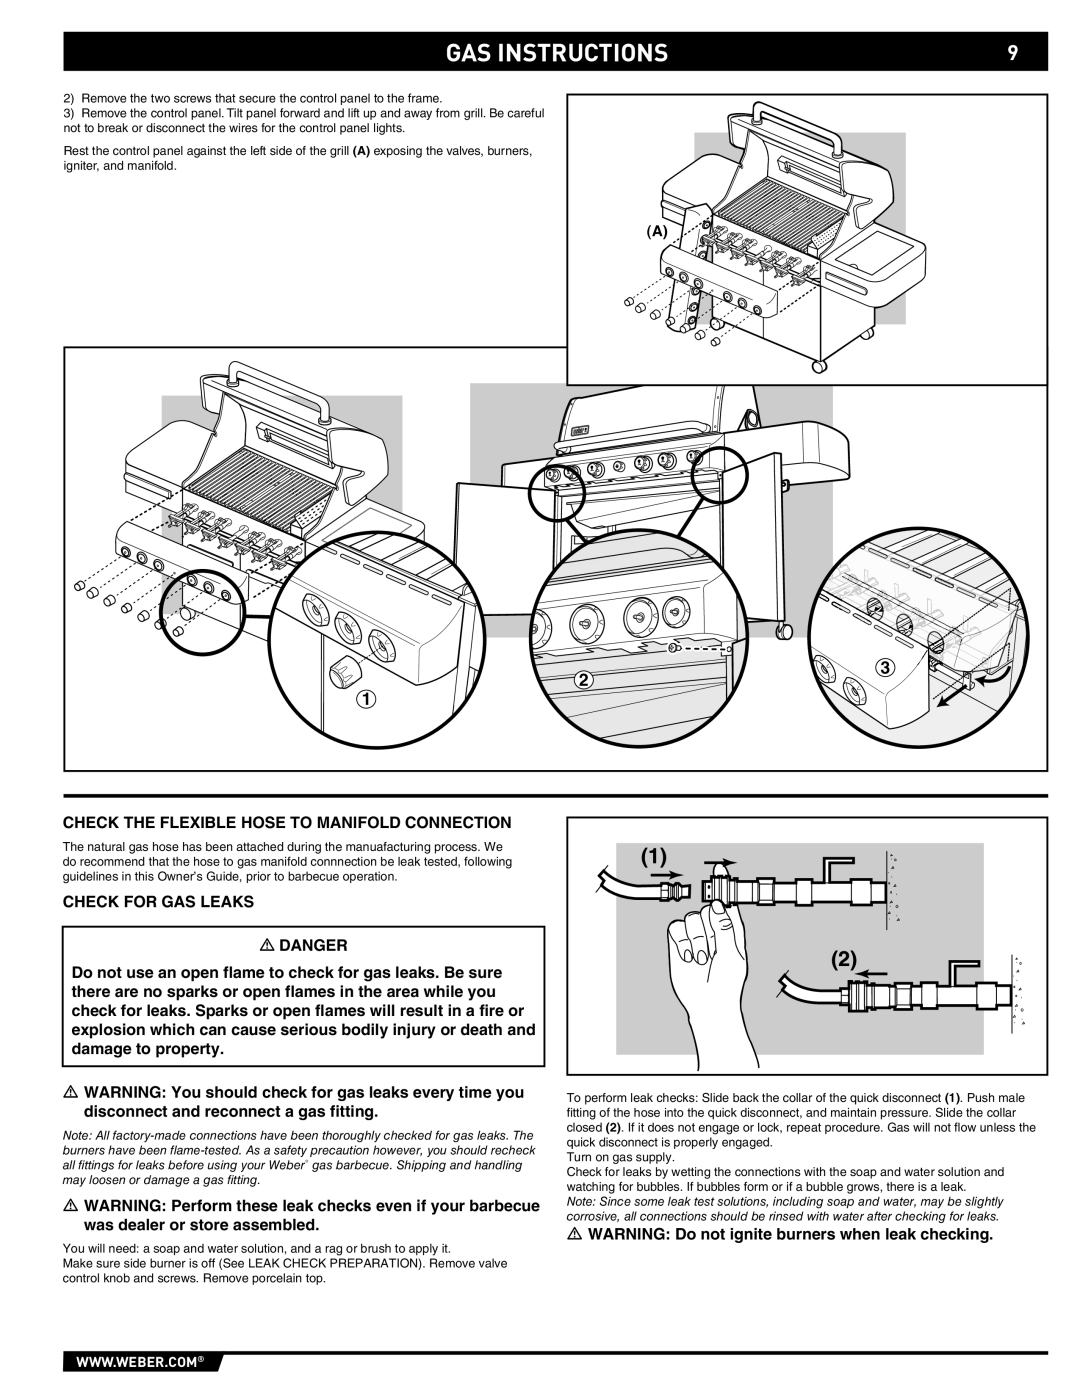 Weber S-470TM manual Gas Instructions, Check The Flexible Hose To Manifold Connection, Check For Gas Leaks Danger 